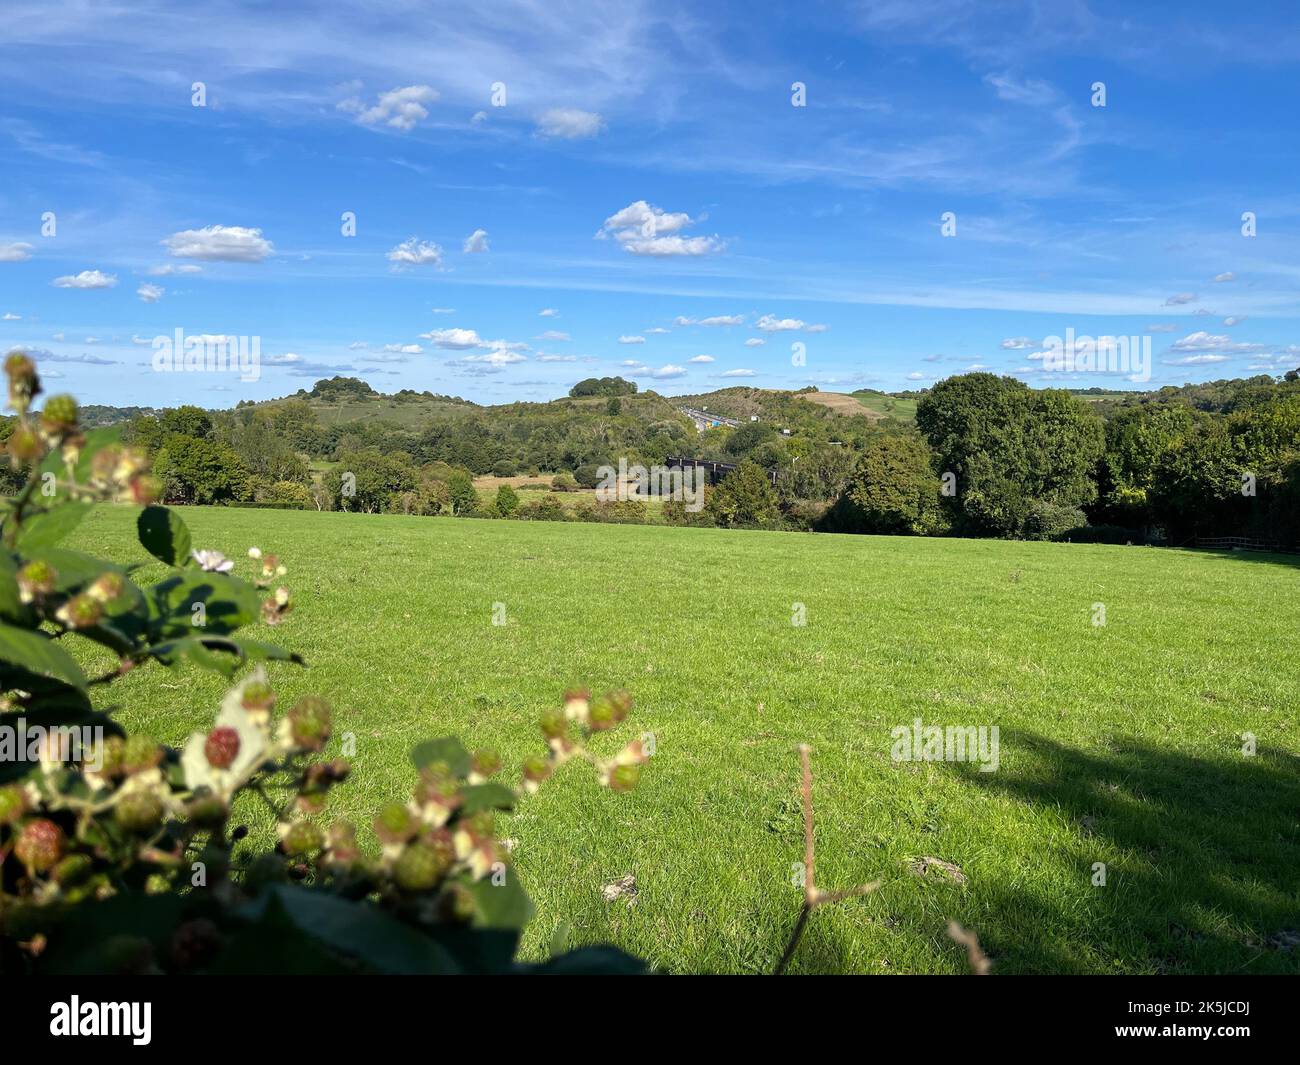 A landscape shot of fresh green lawn with trees in the background under a cloudy blue sky Stock Photo